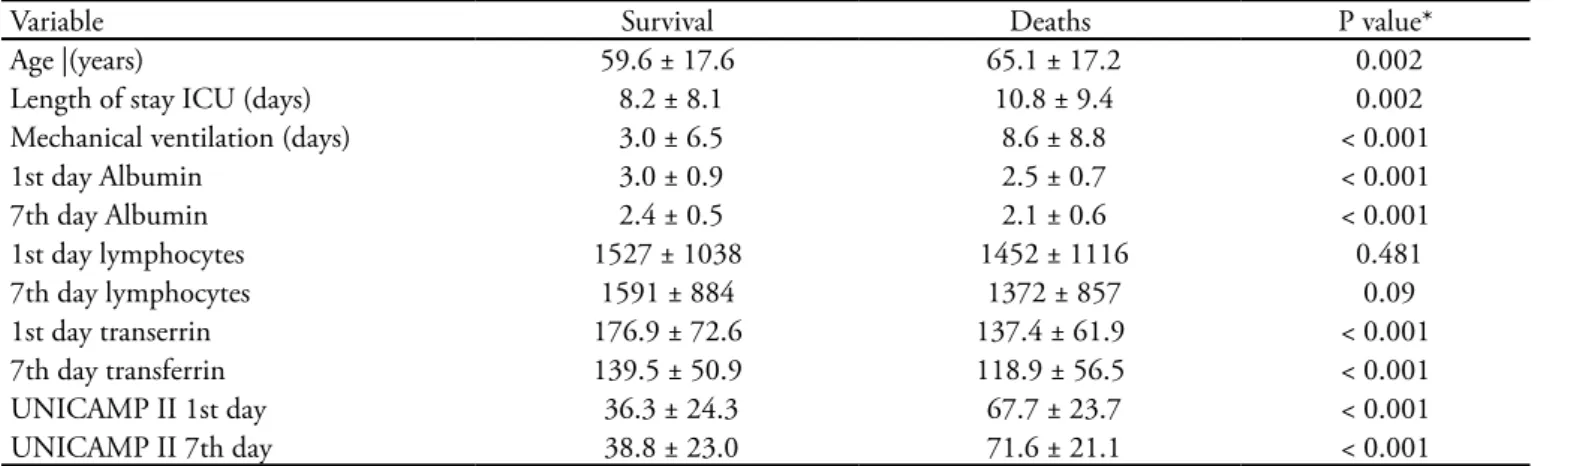 Table 2 – Patient characteristics according to survival status 